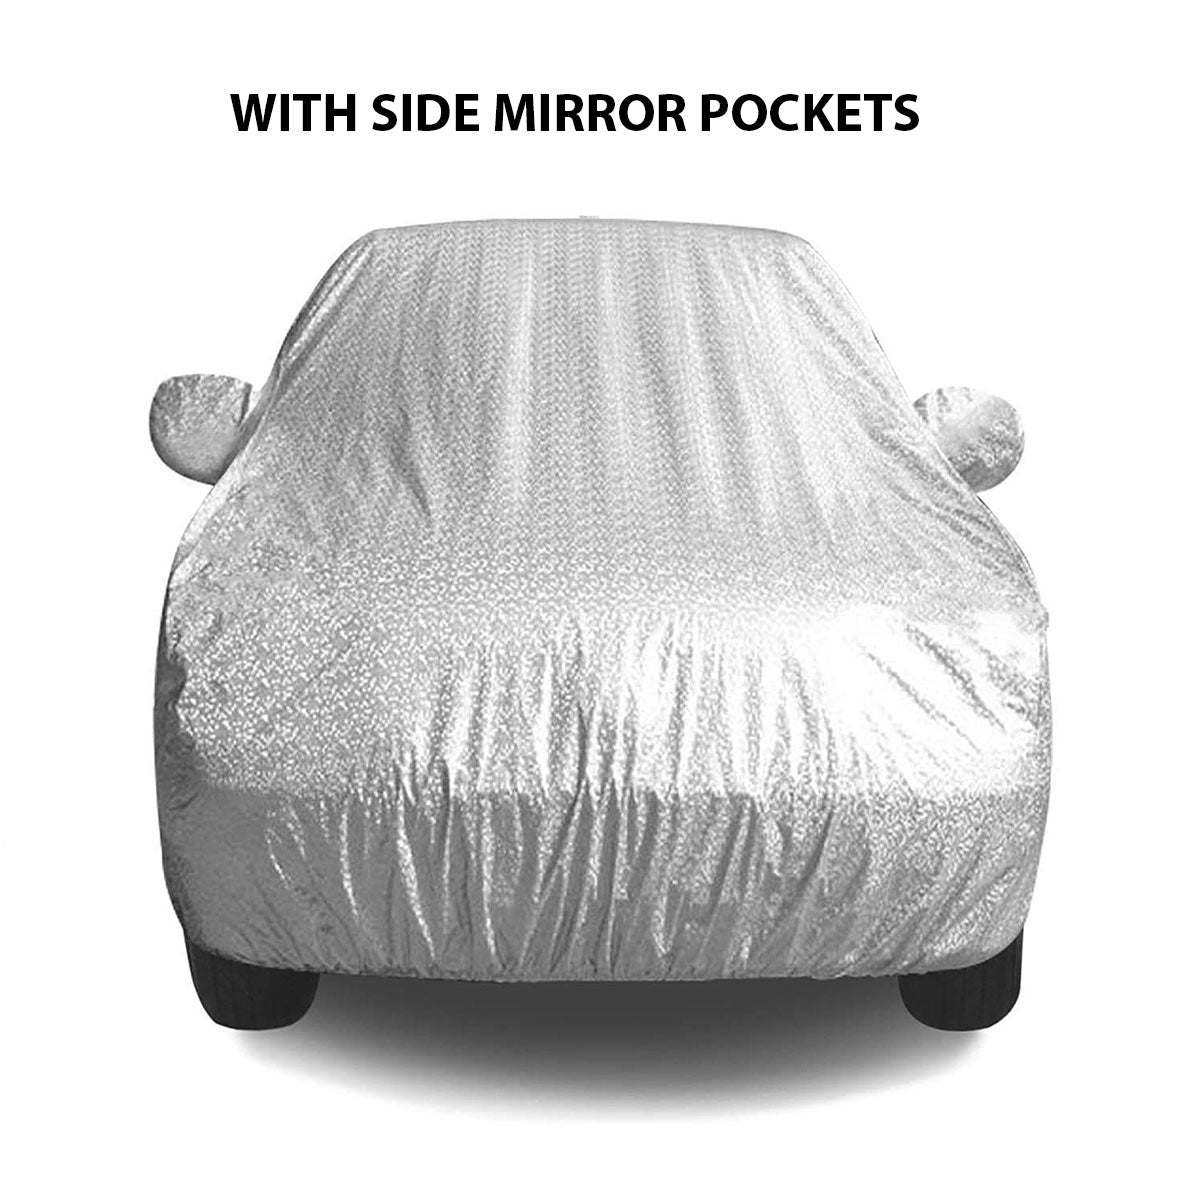 Oshotto Spyro Silver Anti Reflective, dustproof and Water Proof Car Body Cover with Mirror Pockets For Honda Jazz